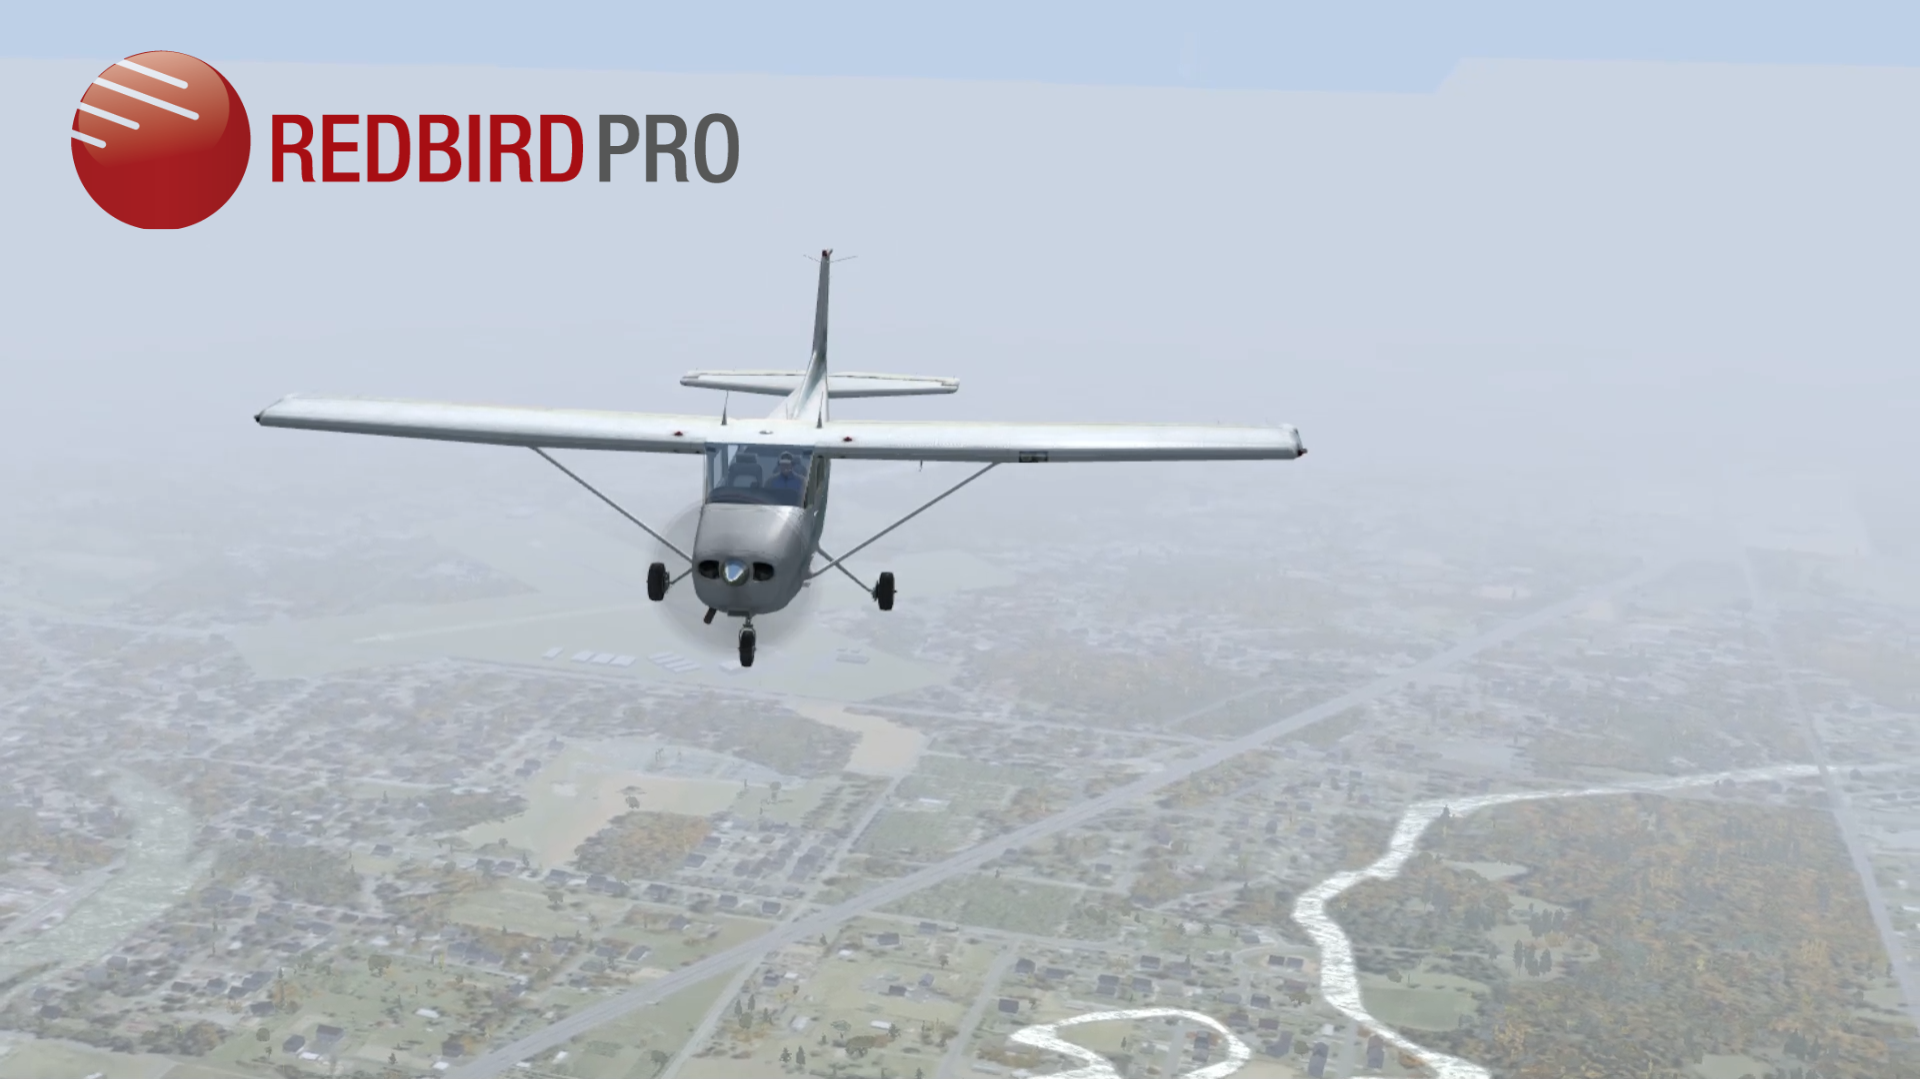 VFR and IFR Training Scenarios for May 2022